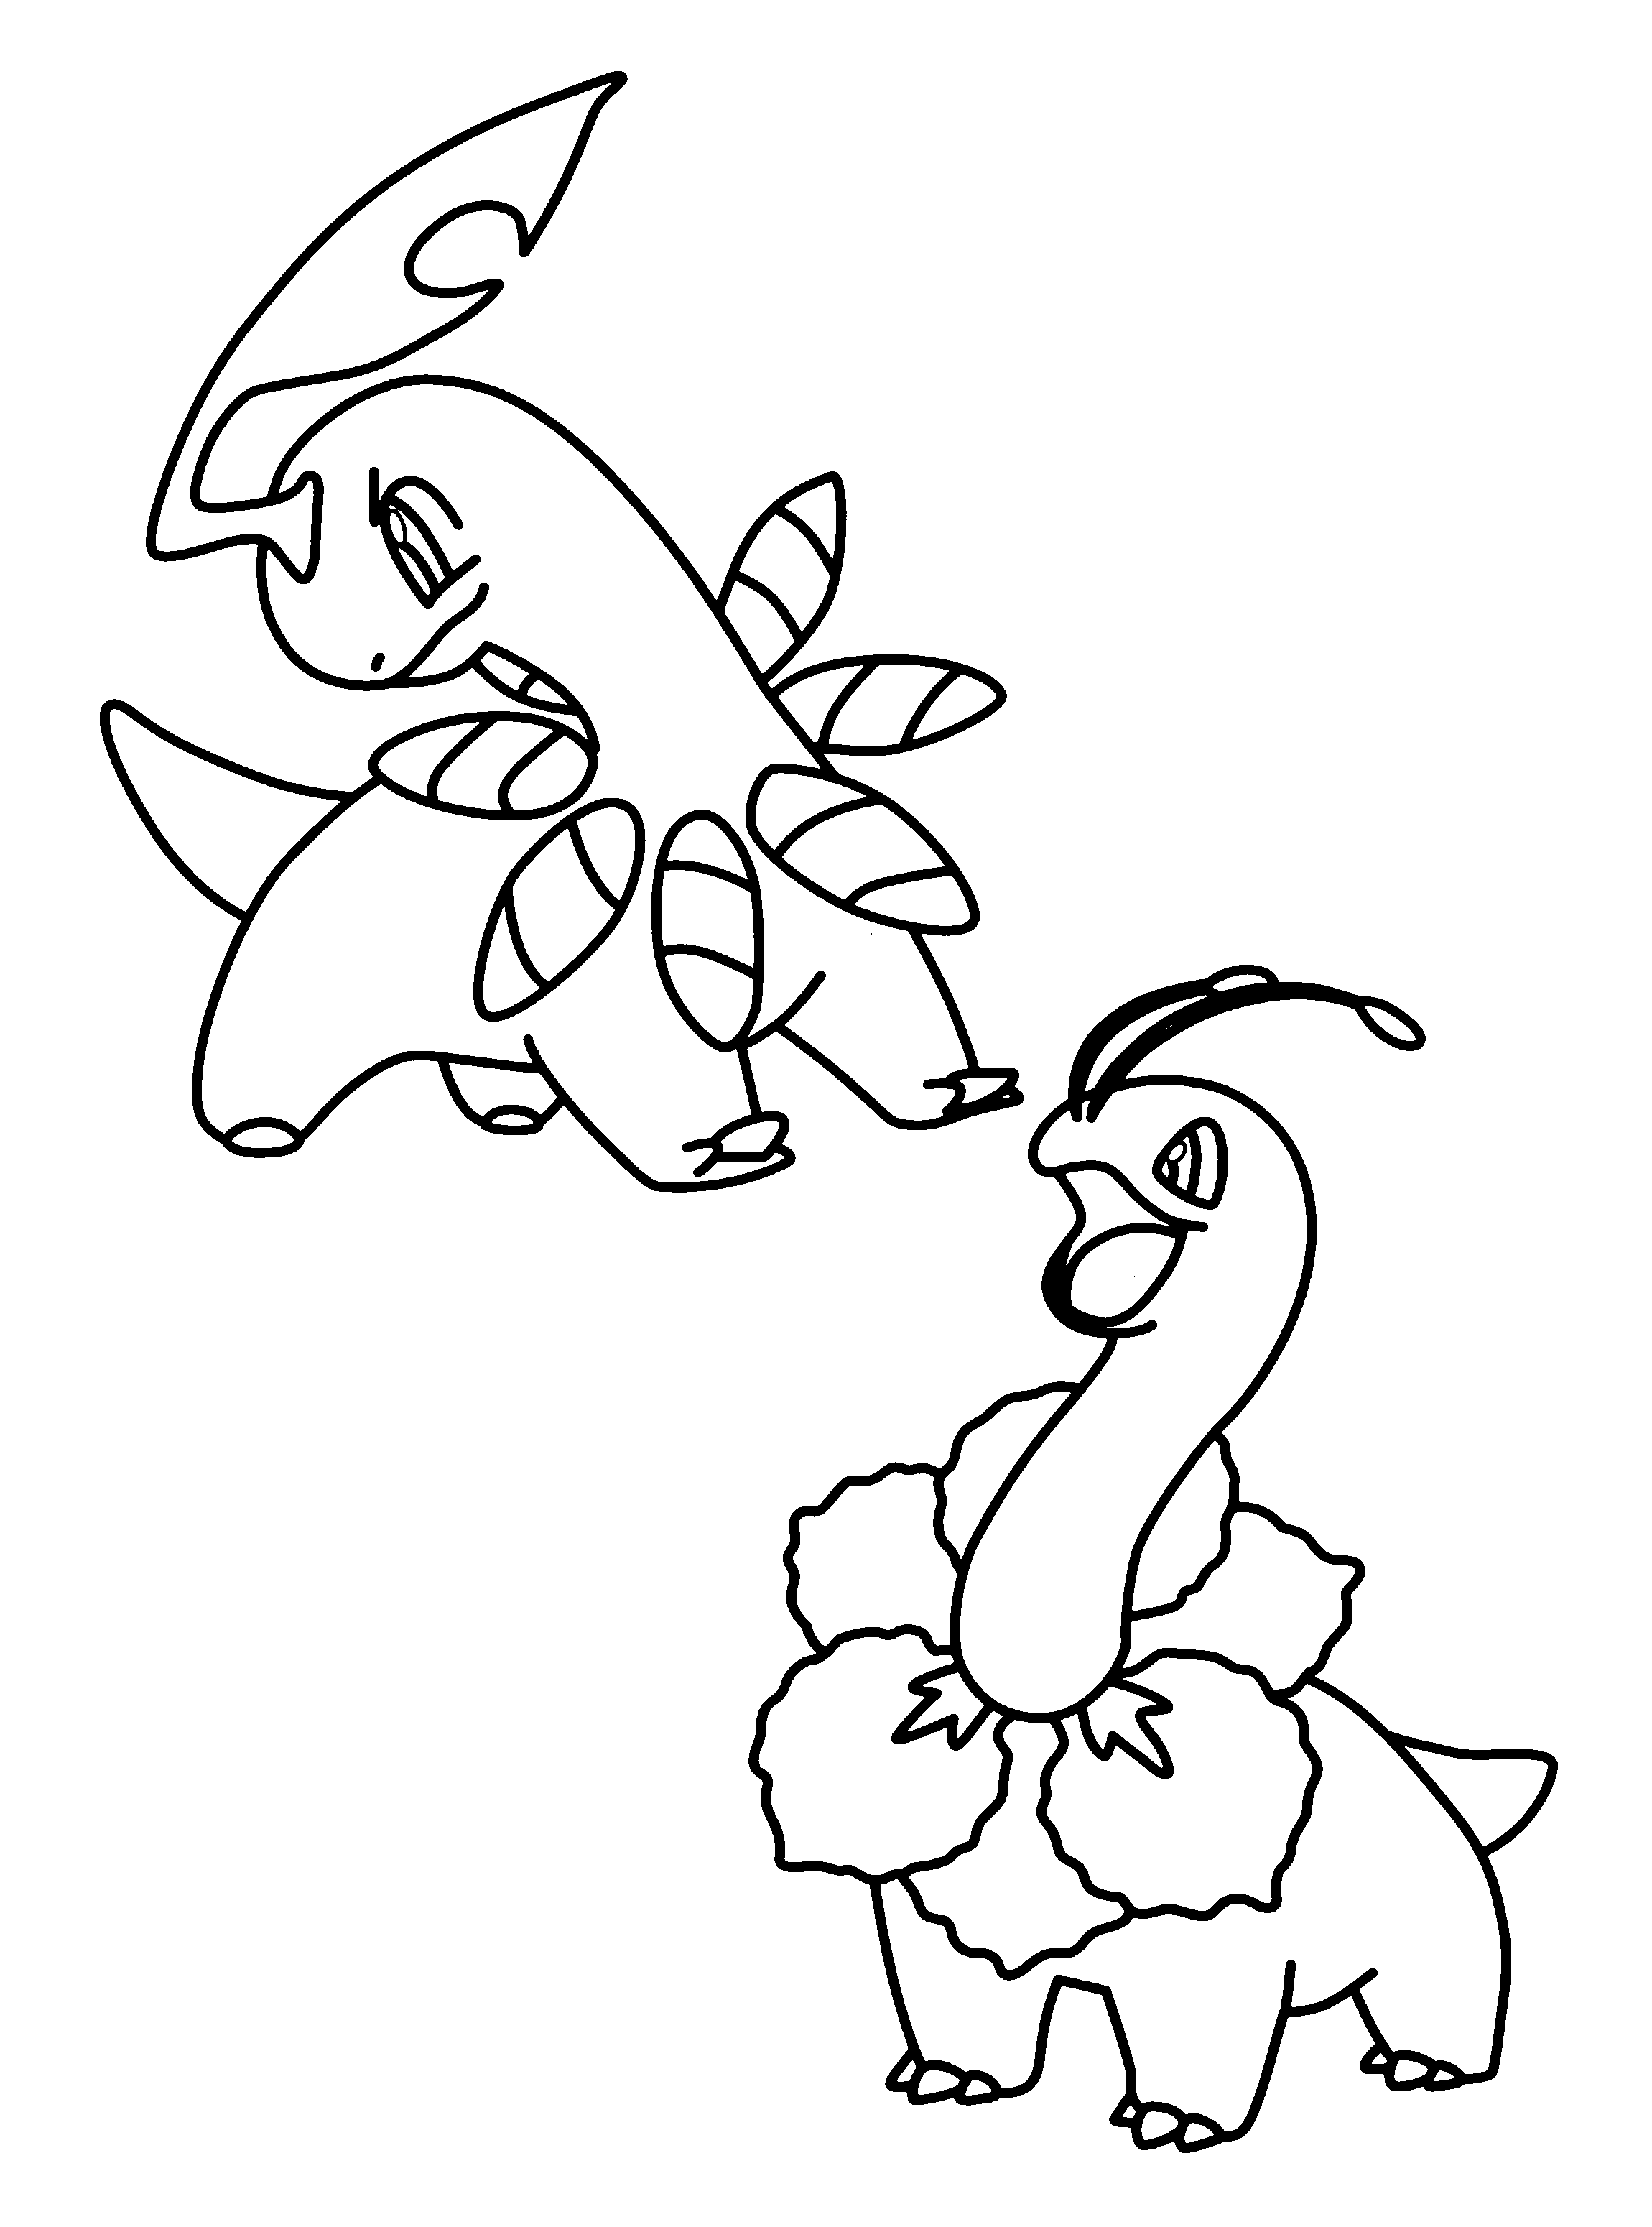 Coloring page: Pokemon Go (Video Games) #154291 - Printable coloring pages